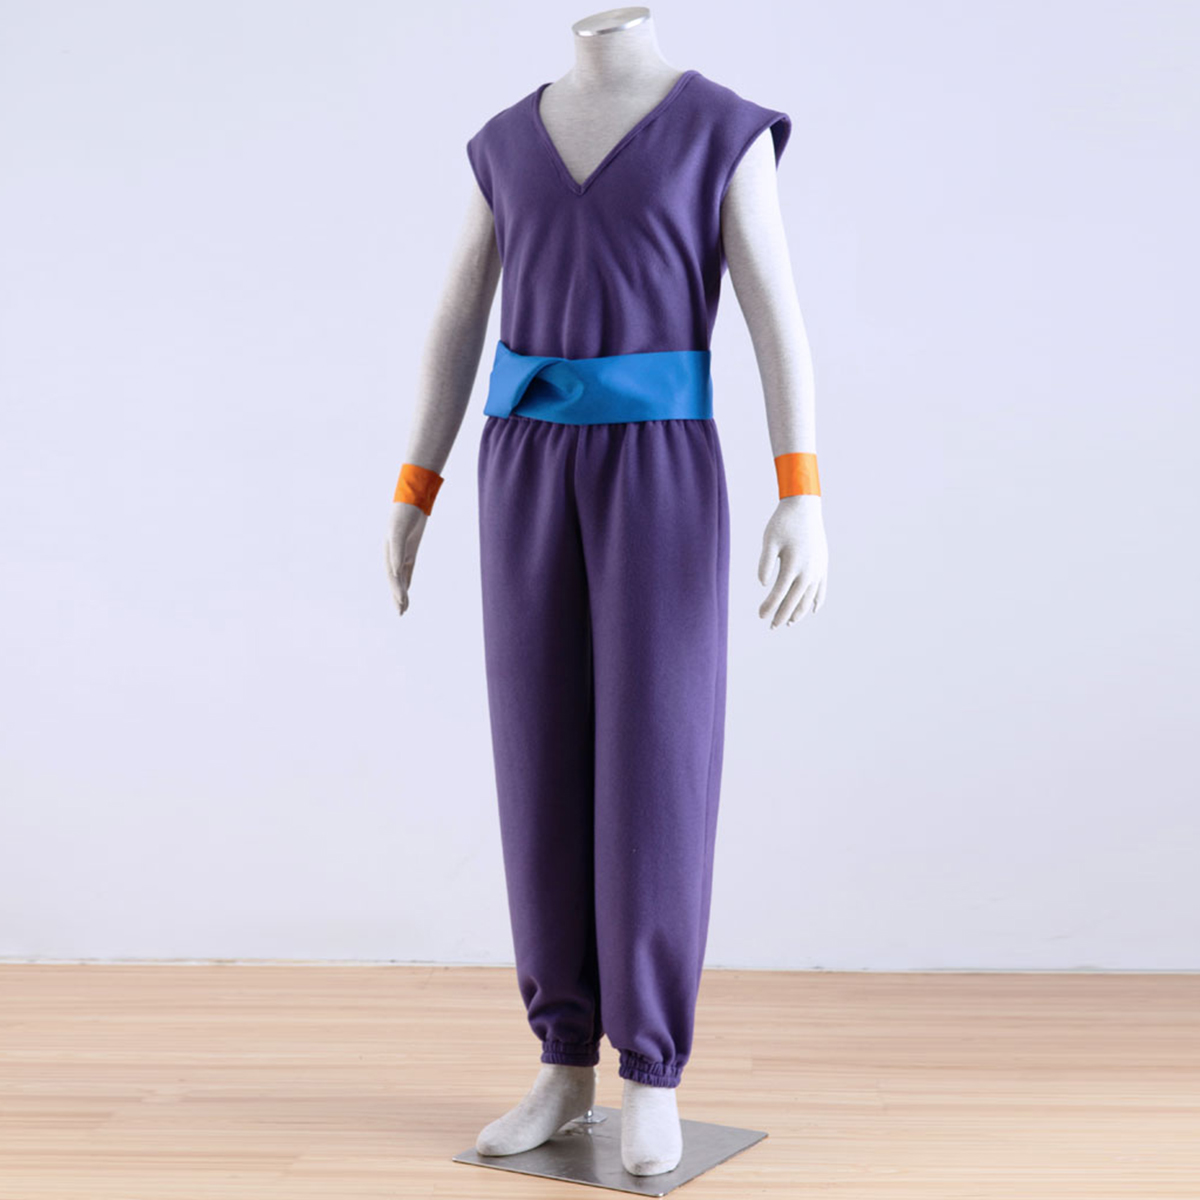 Dragon Ball Piccolo 1 Purple Anime Cosplay Costumes Outfit